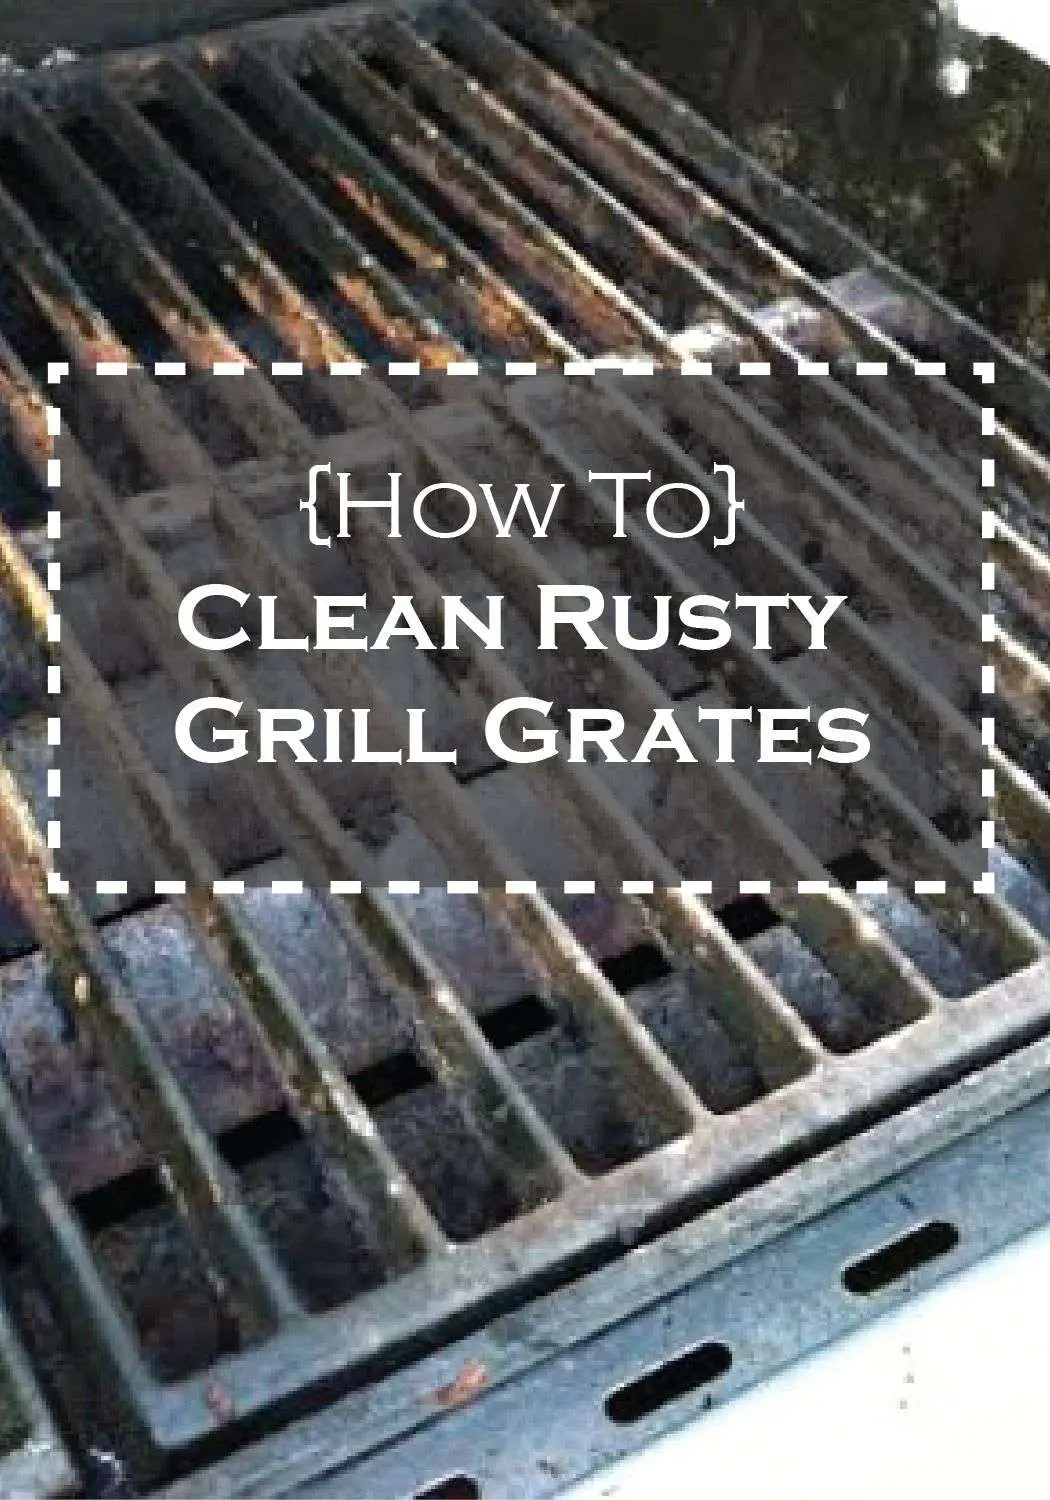 How to Clean Rusty Cast Iron Grill Grates